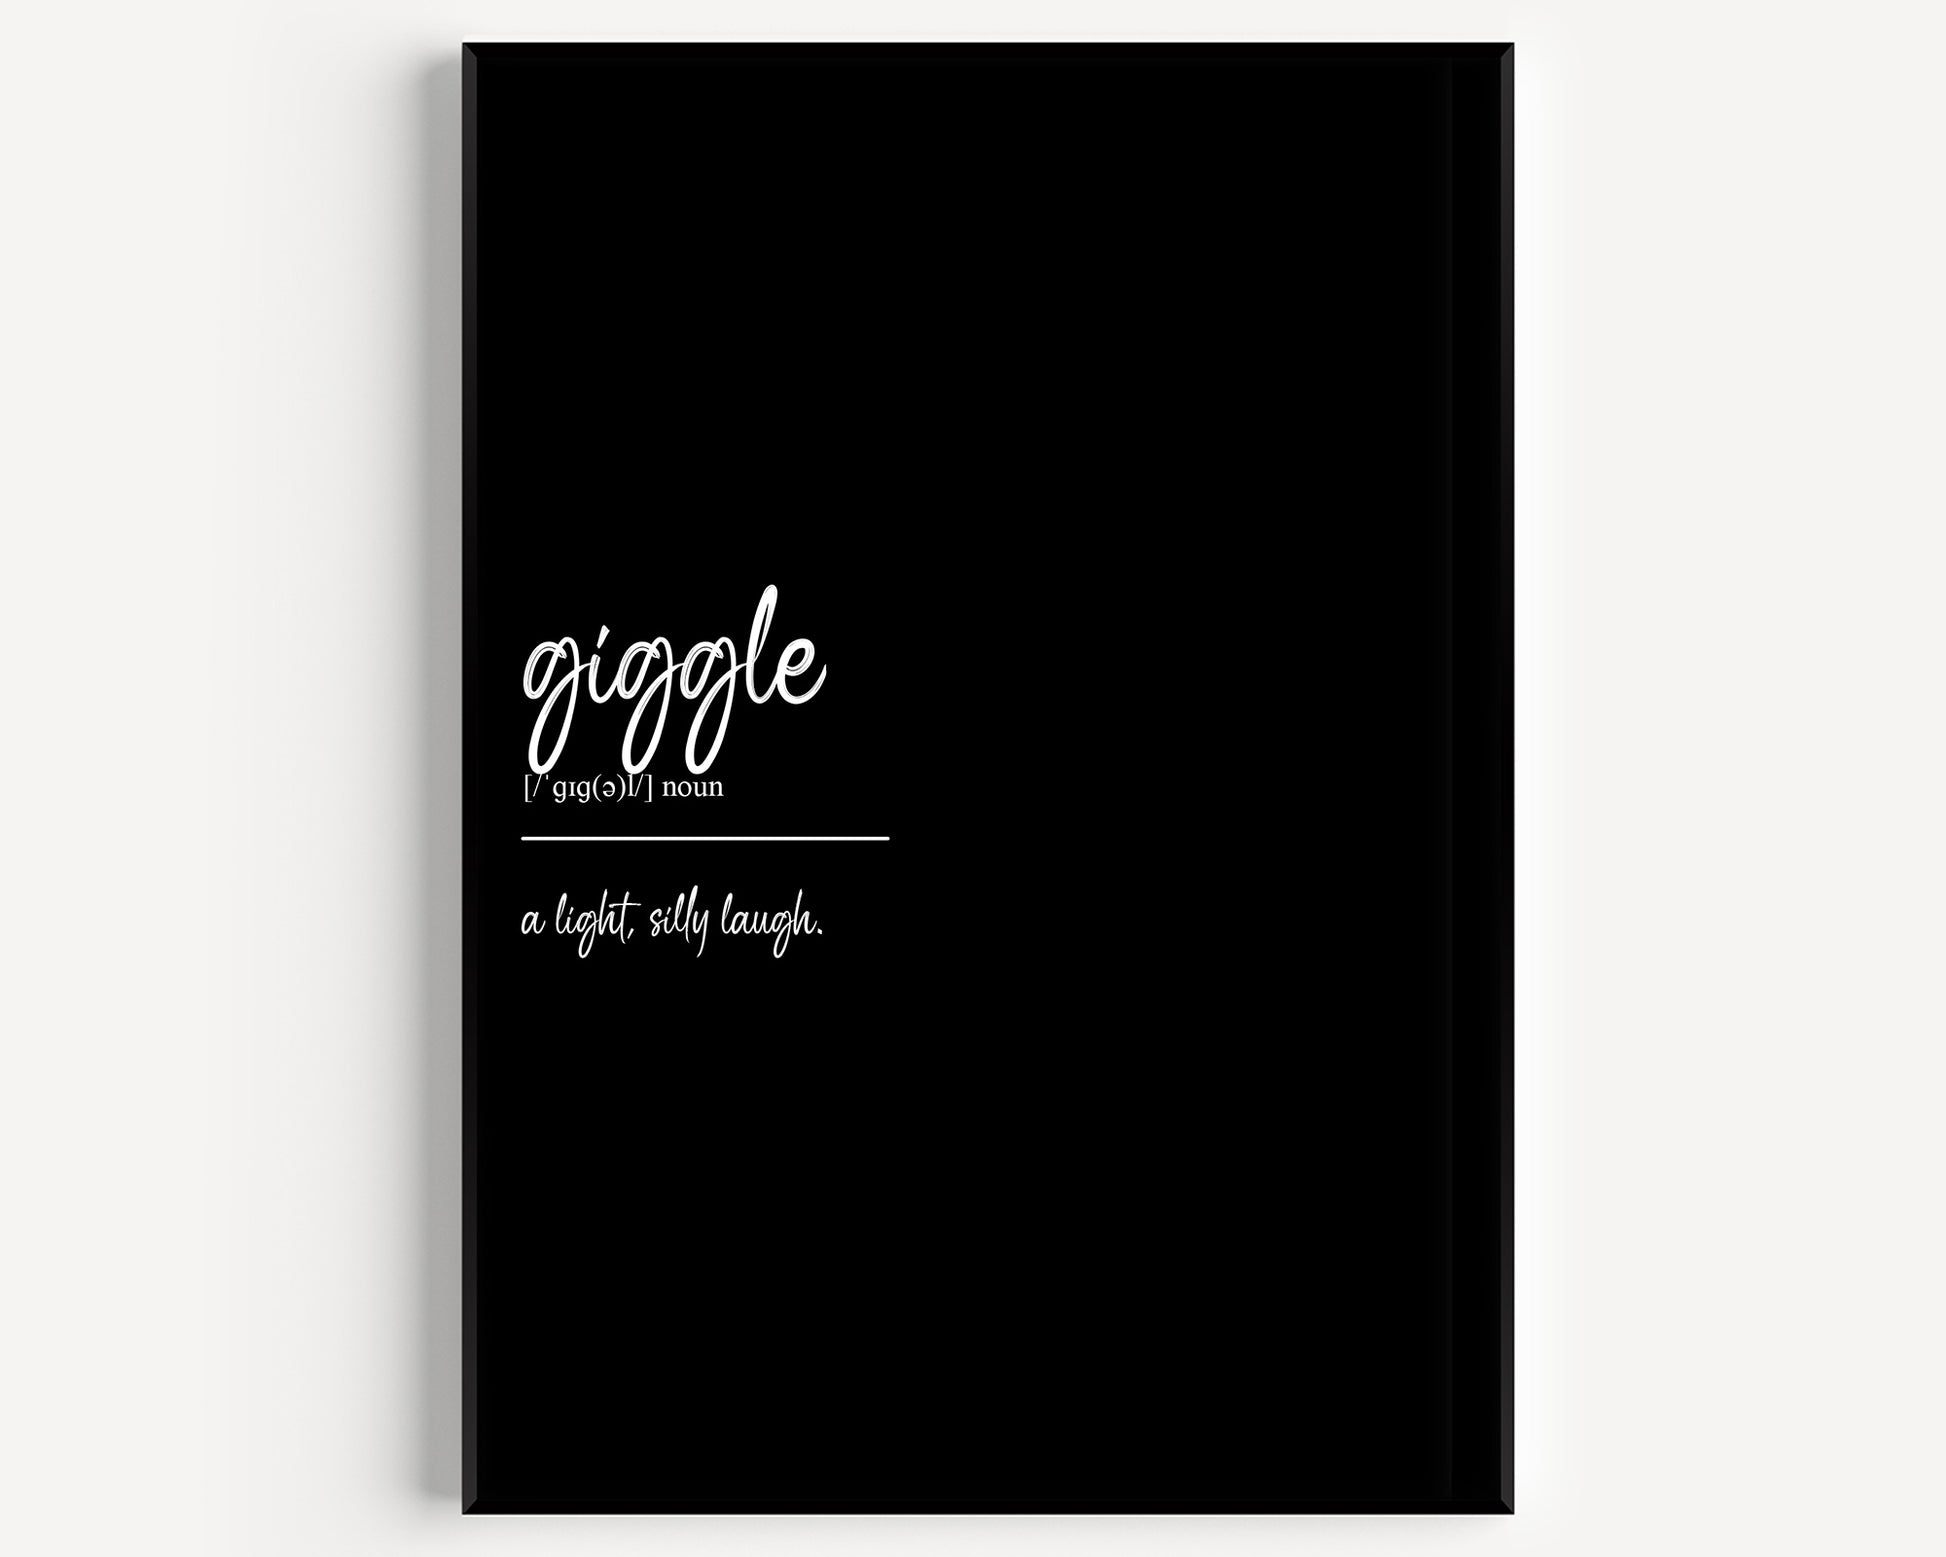 Giggle Definition Print - Magic Posters